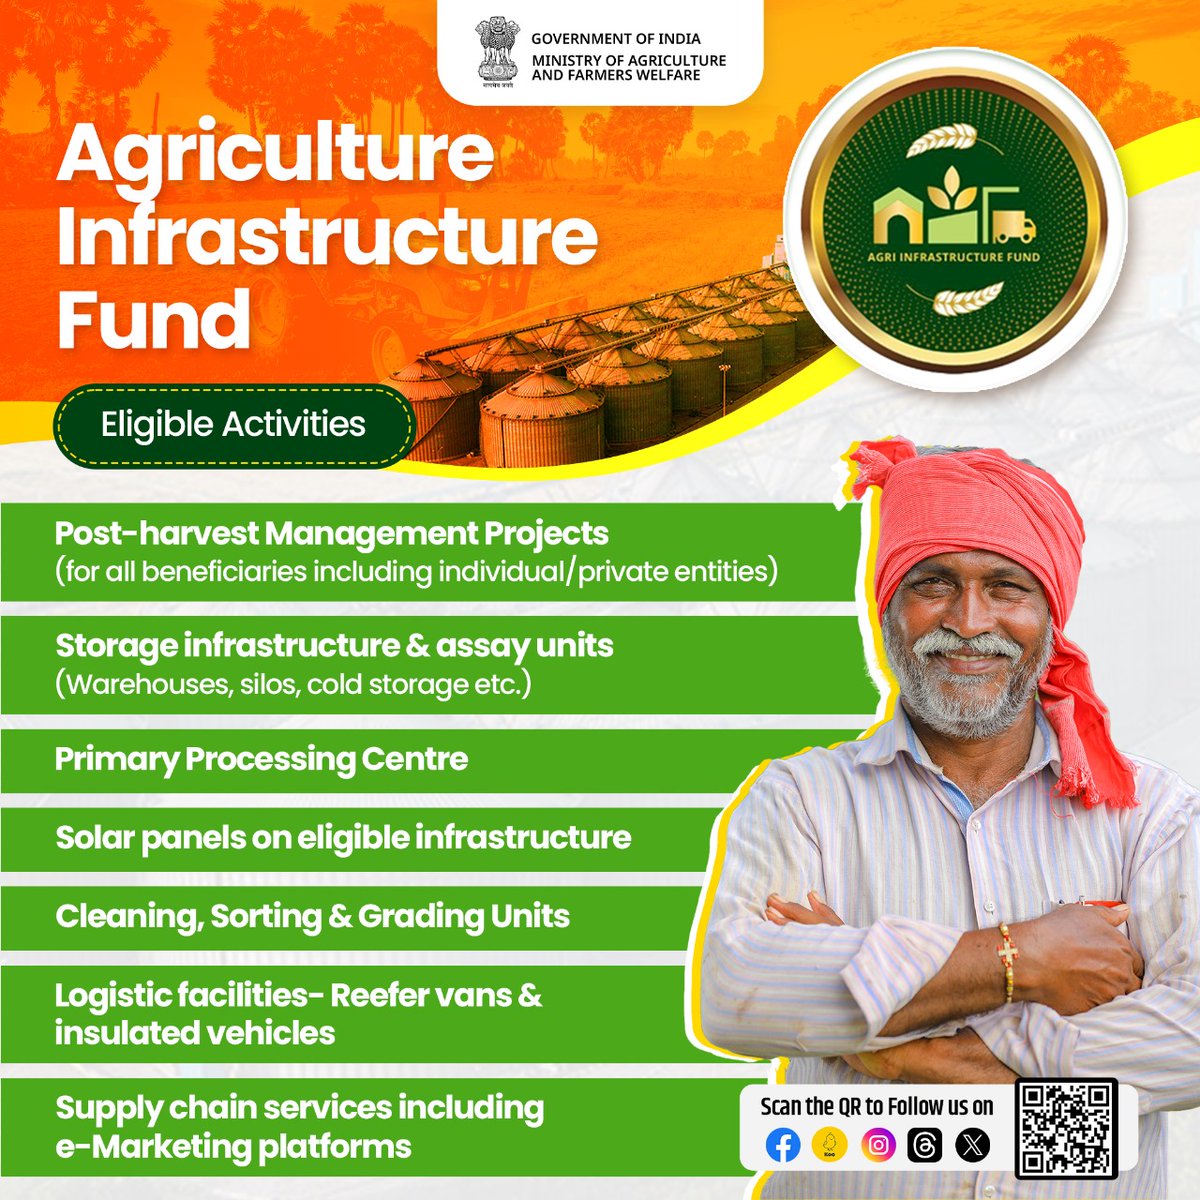 #AgriInfraFund offers financial assistance to #farmers, #agripreneurs, startups, SHGs, #FPOs, PACs etc. facilitating the construction of infrastructure for the post-harvest stage. It provides credit guarantees for loans up to ₹2 Crore & offers a 3% per annum interest subvention.